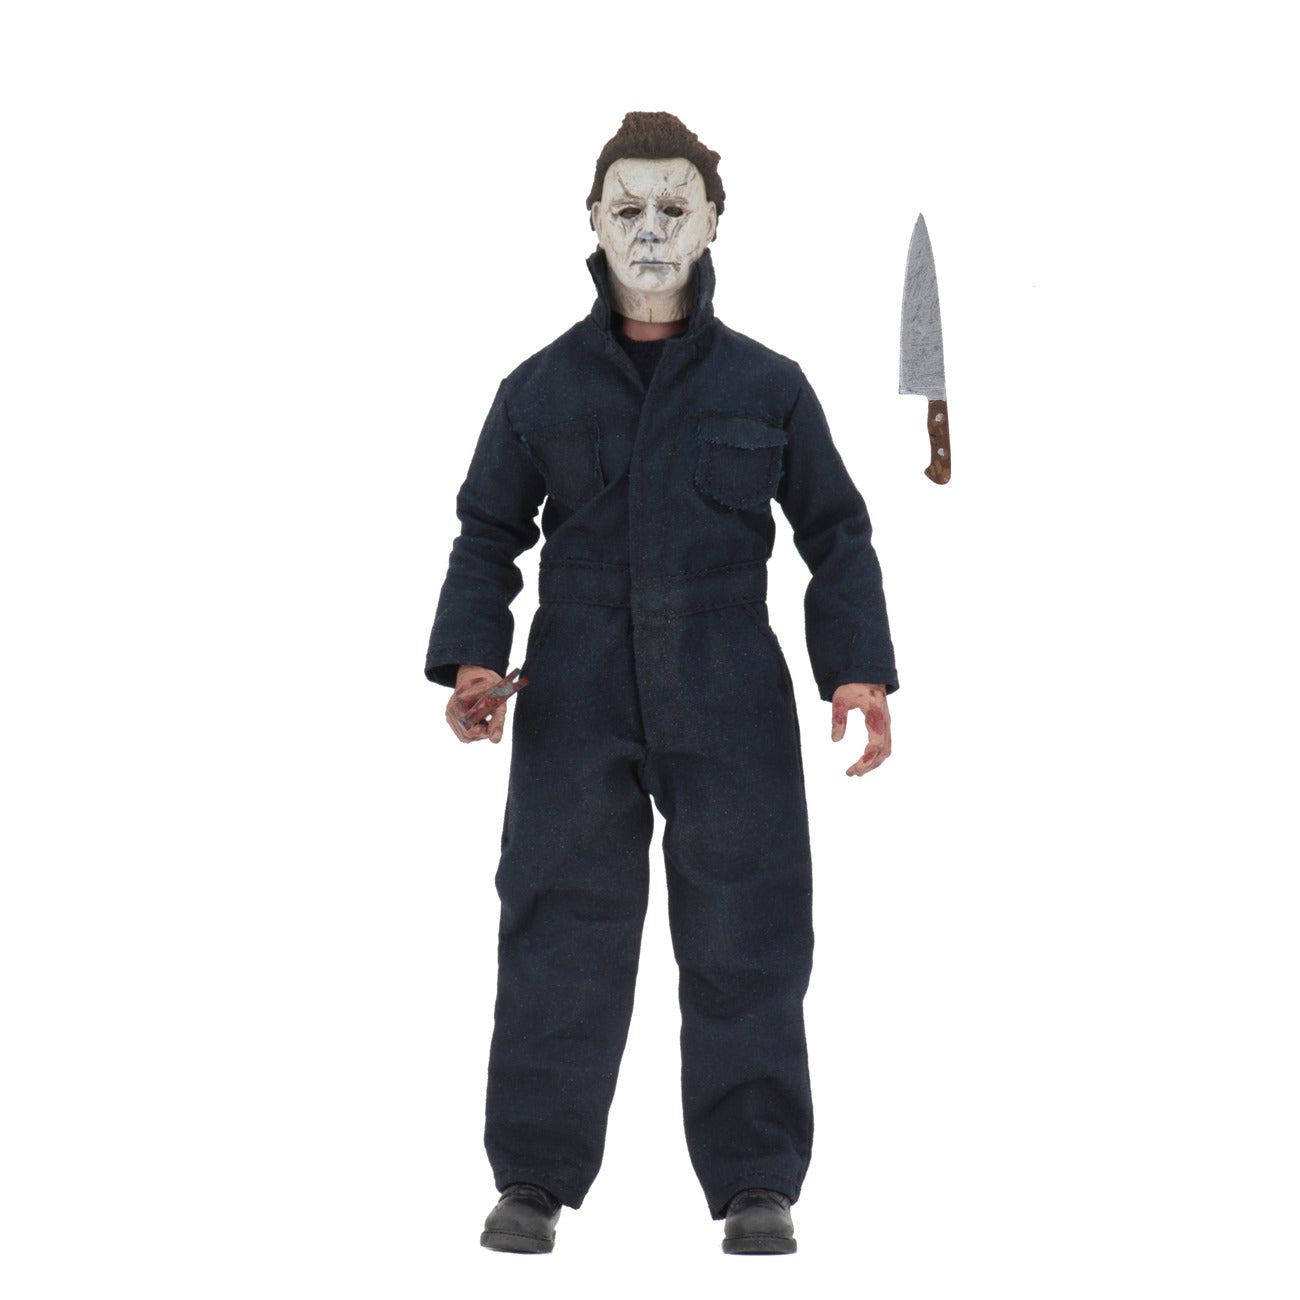 Halloween 2018 Michael Myers Clothed 8 inch Action Figure